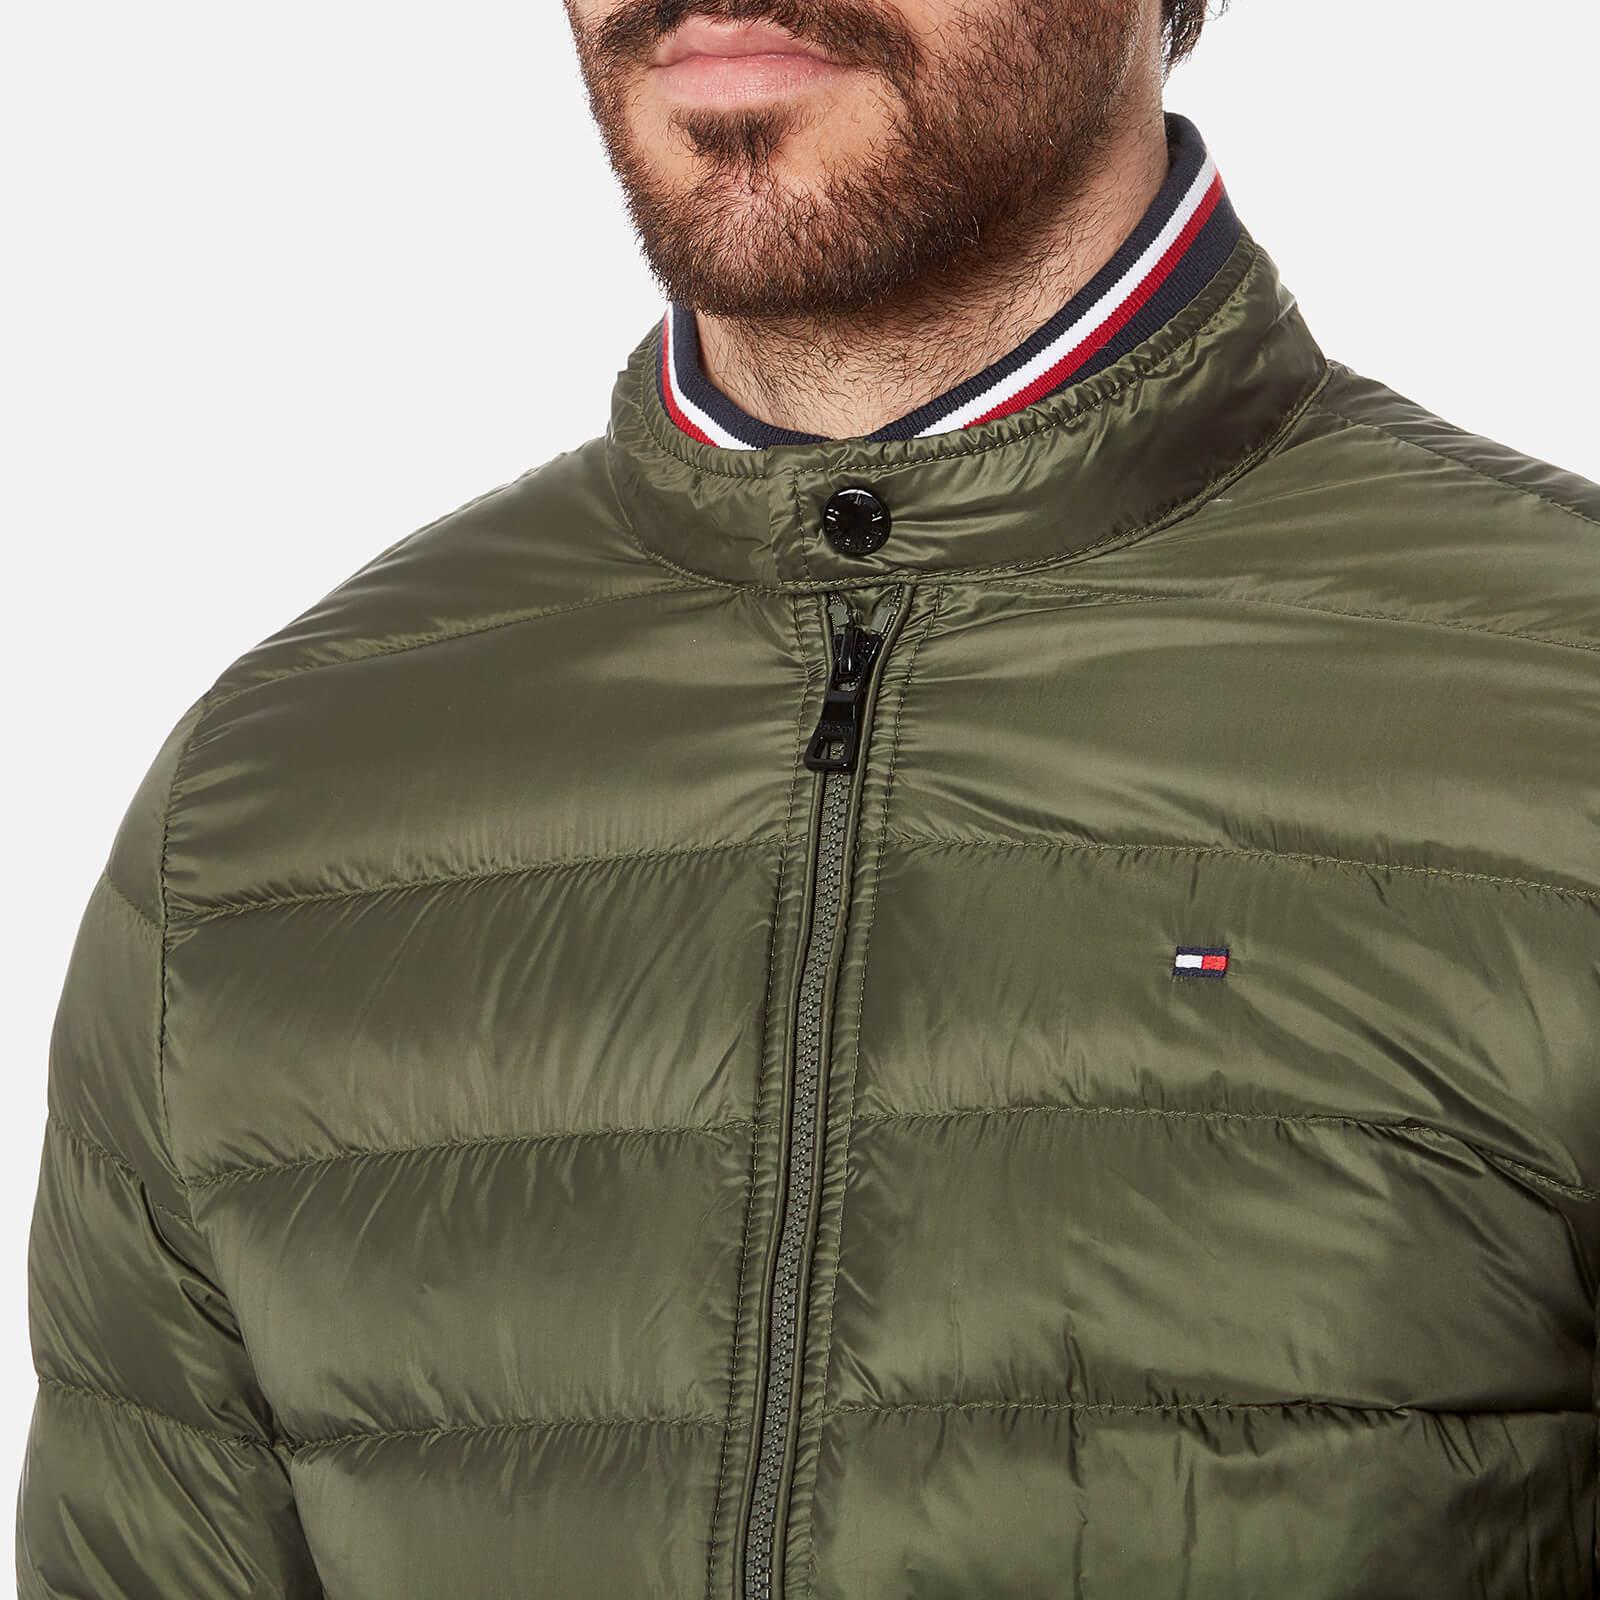 Tommy Hilfiger Synthetic Arlos Down Bomber Jacket in Green for Men - Lyst